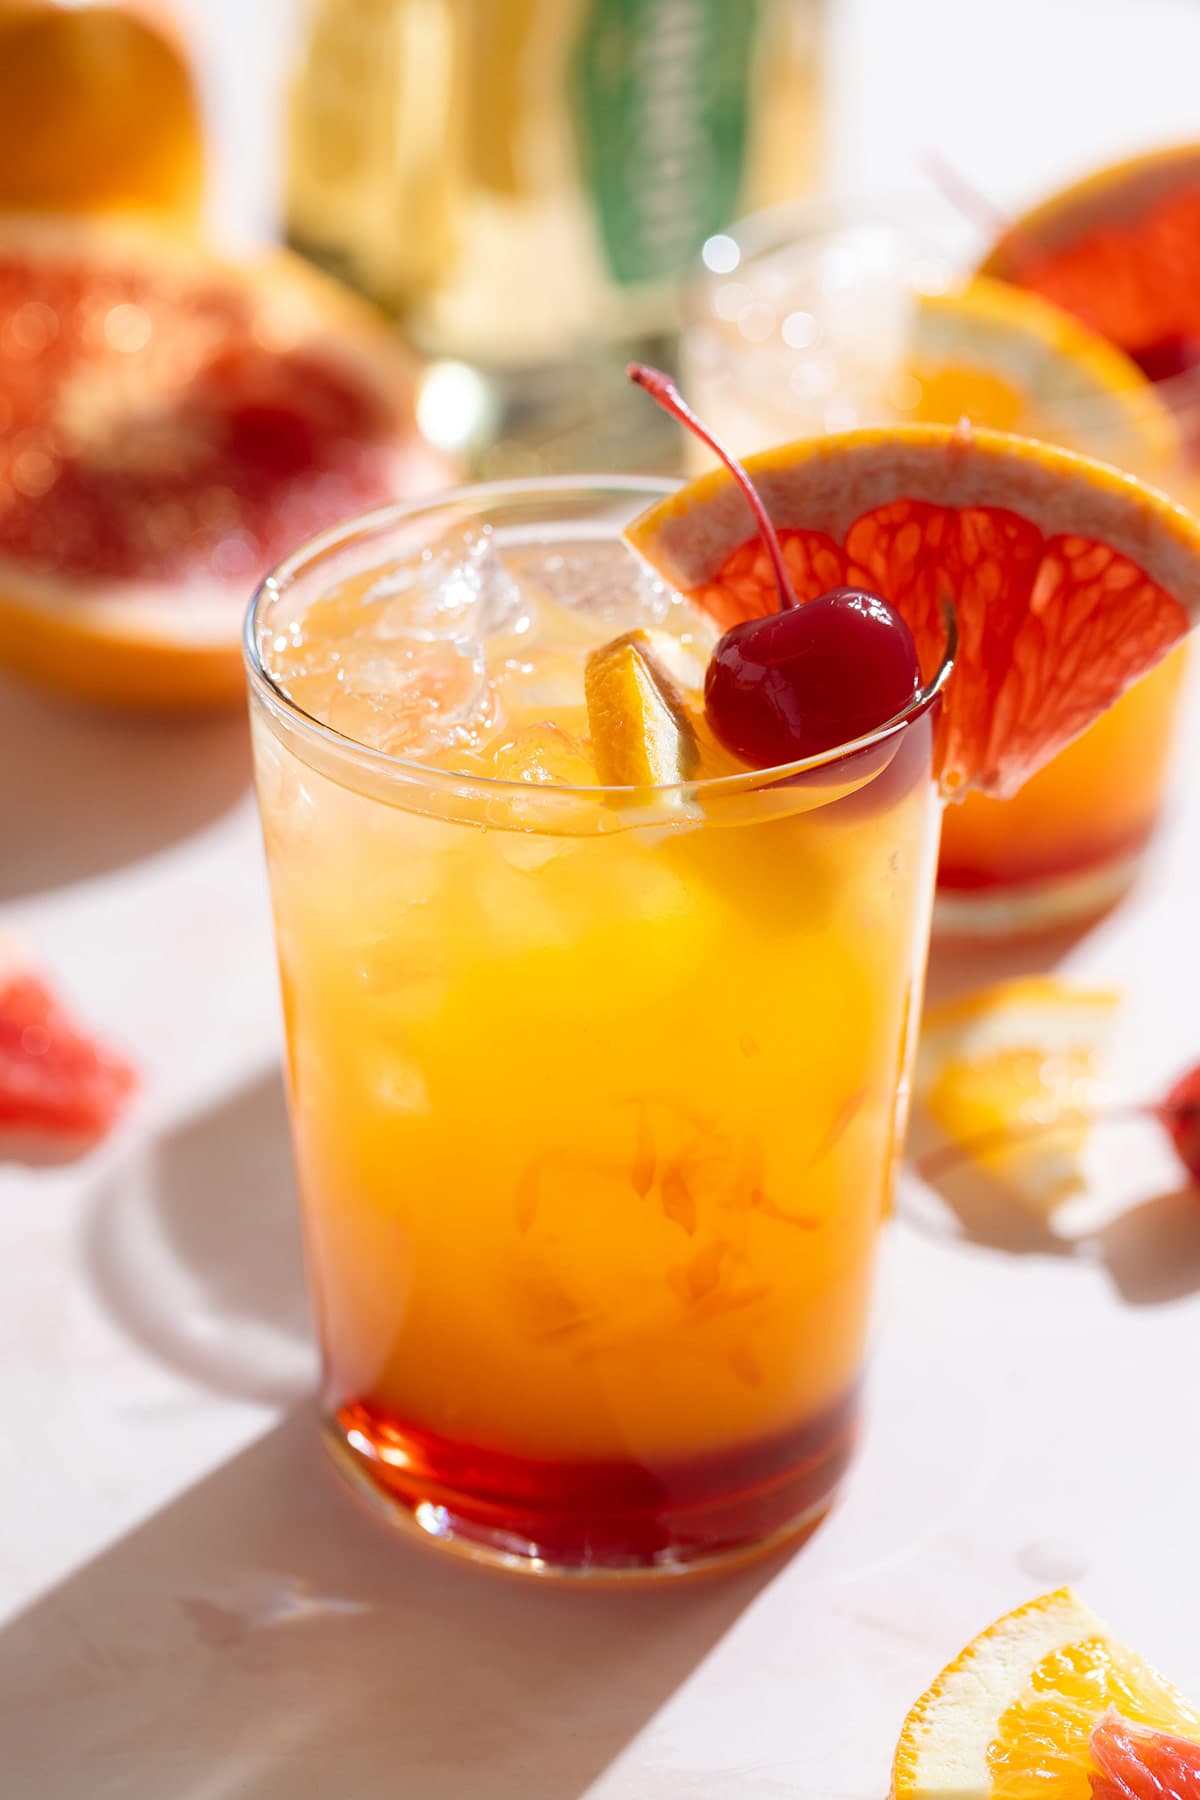 A tequila sunset cocktail in a tall glass with orange juice and red grenadine on the bottom of the glass for an ombre effect garnished with a cocktail cherry and a slice of grapefruit.